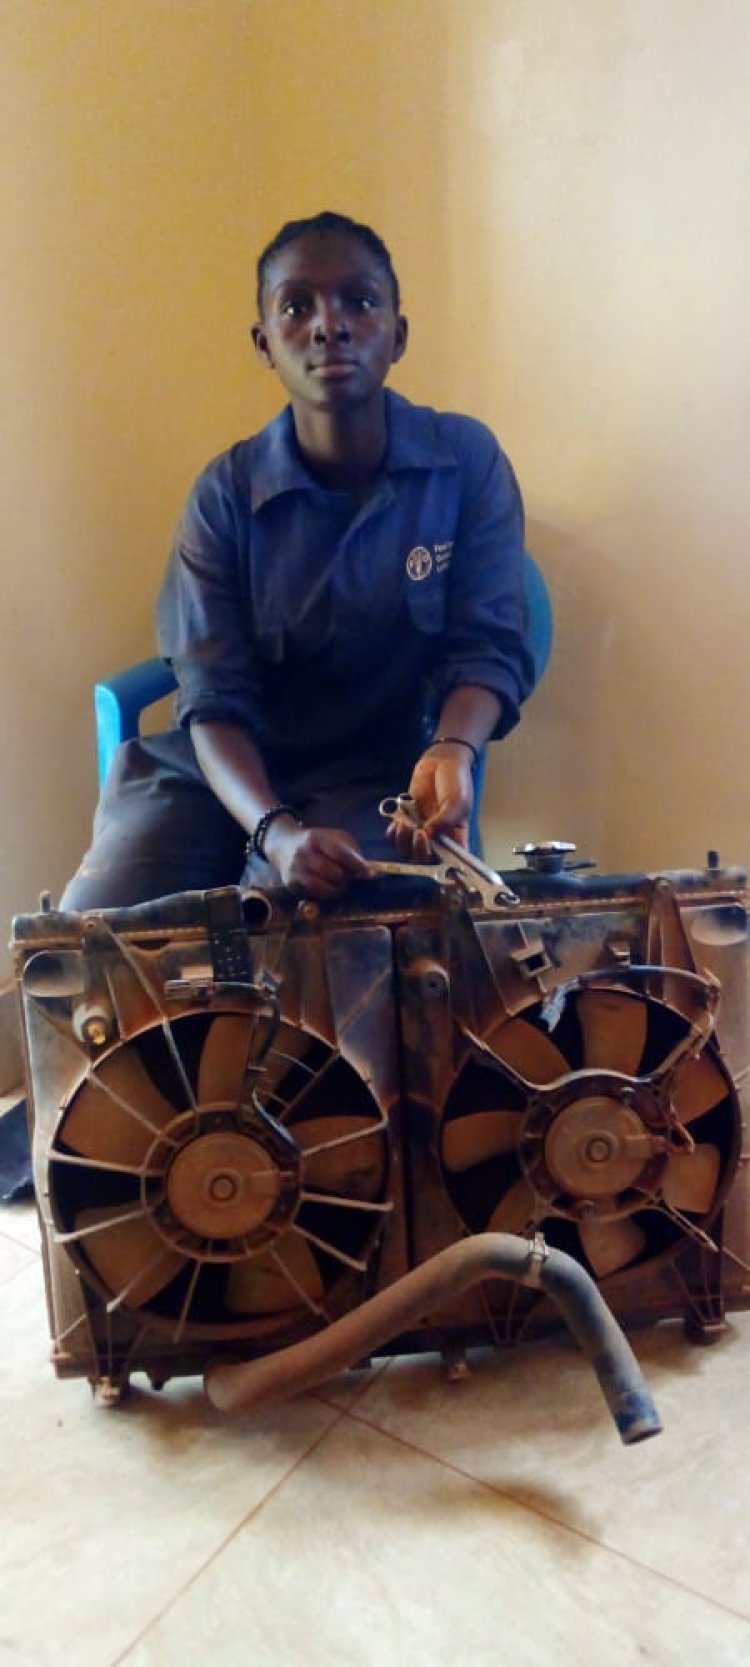 Meet a 21 Year Old Orphan, Learning Mechanical to Earn a Living